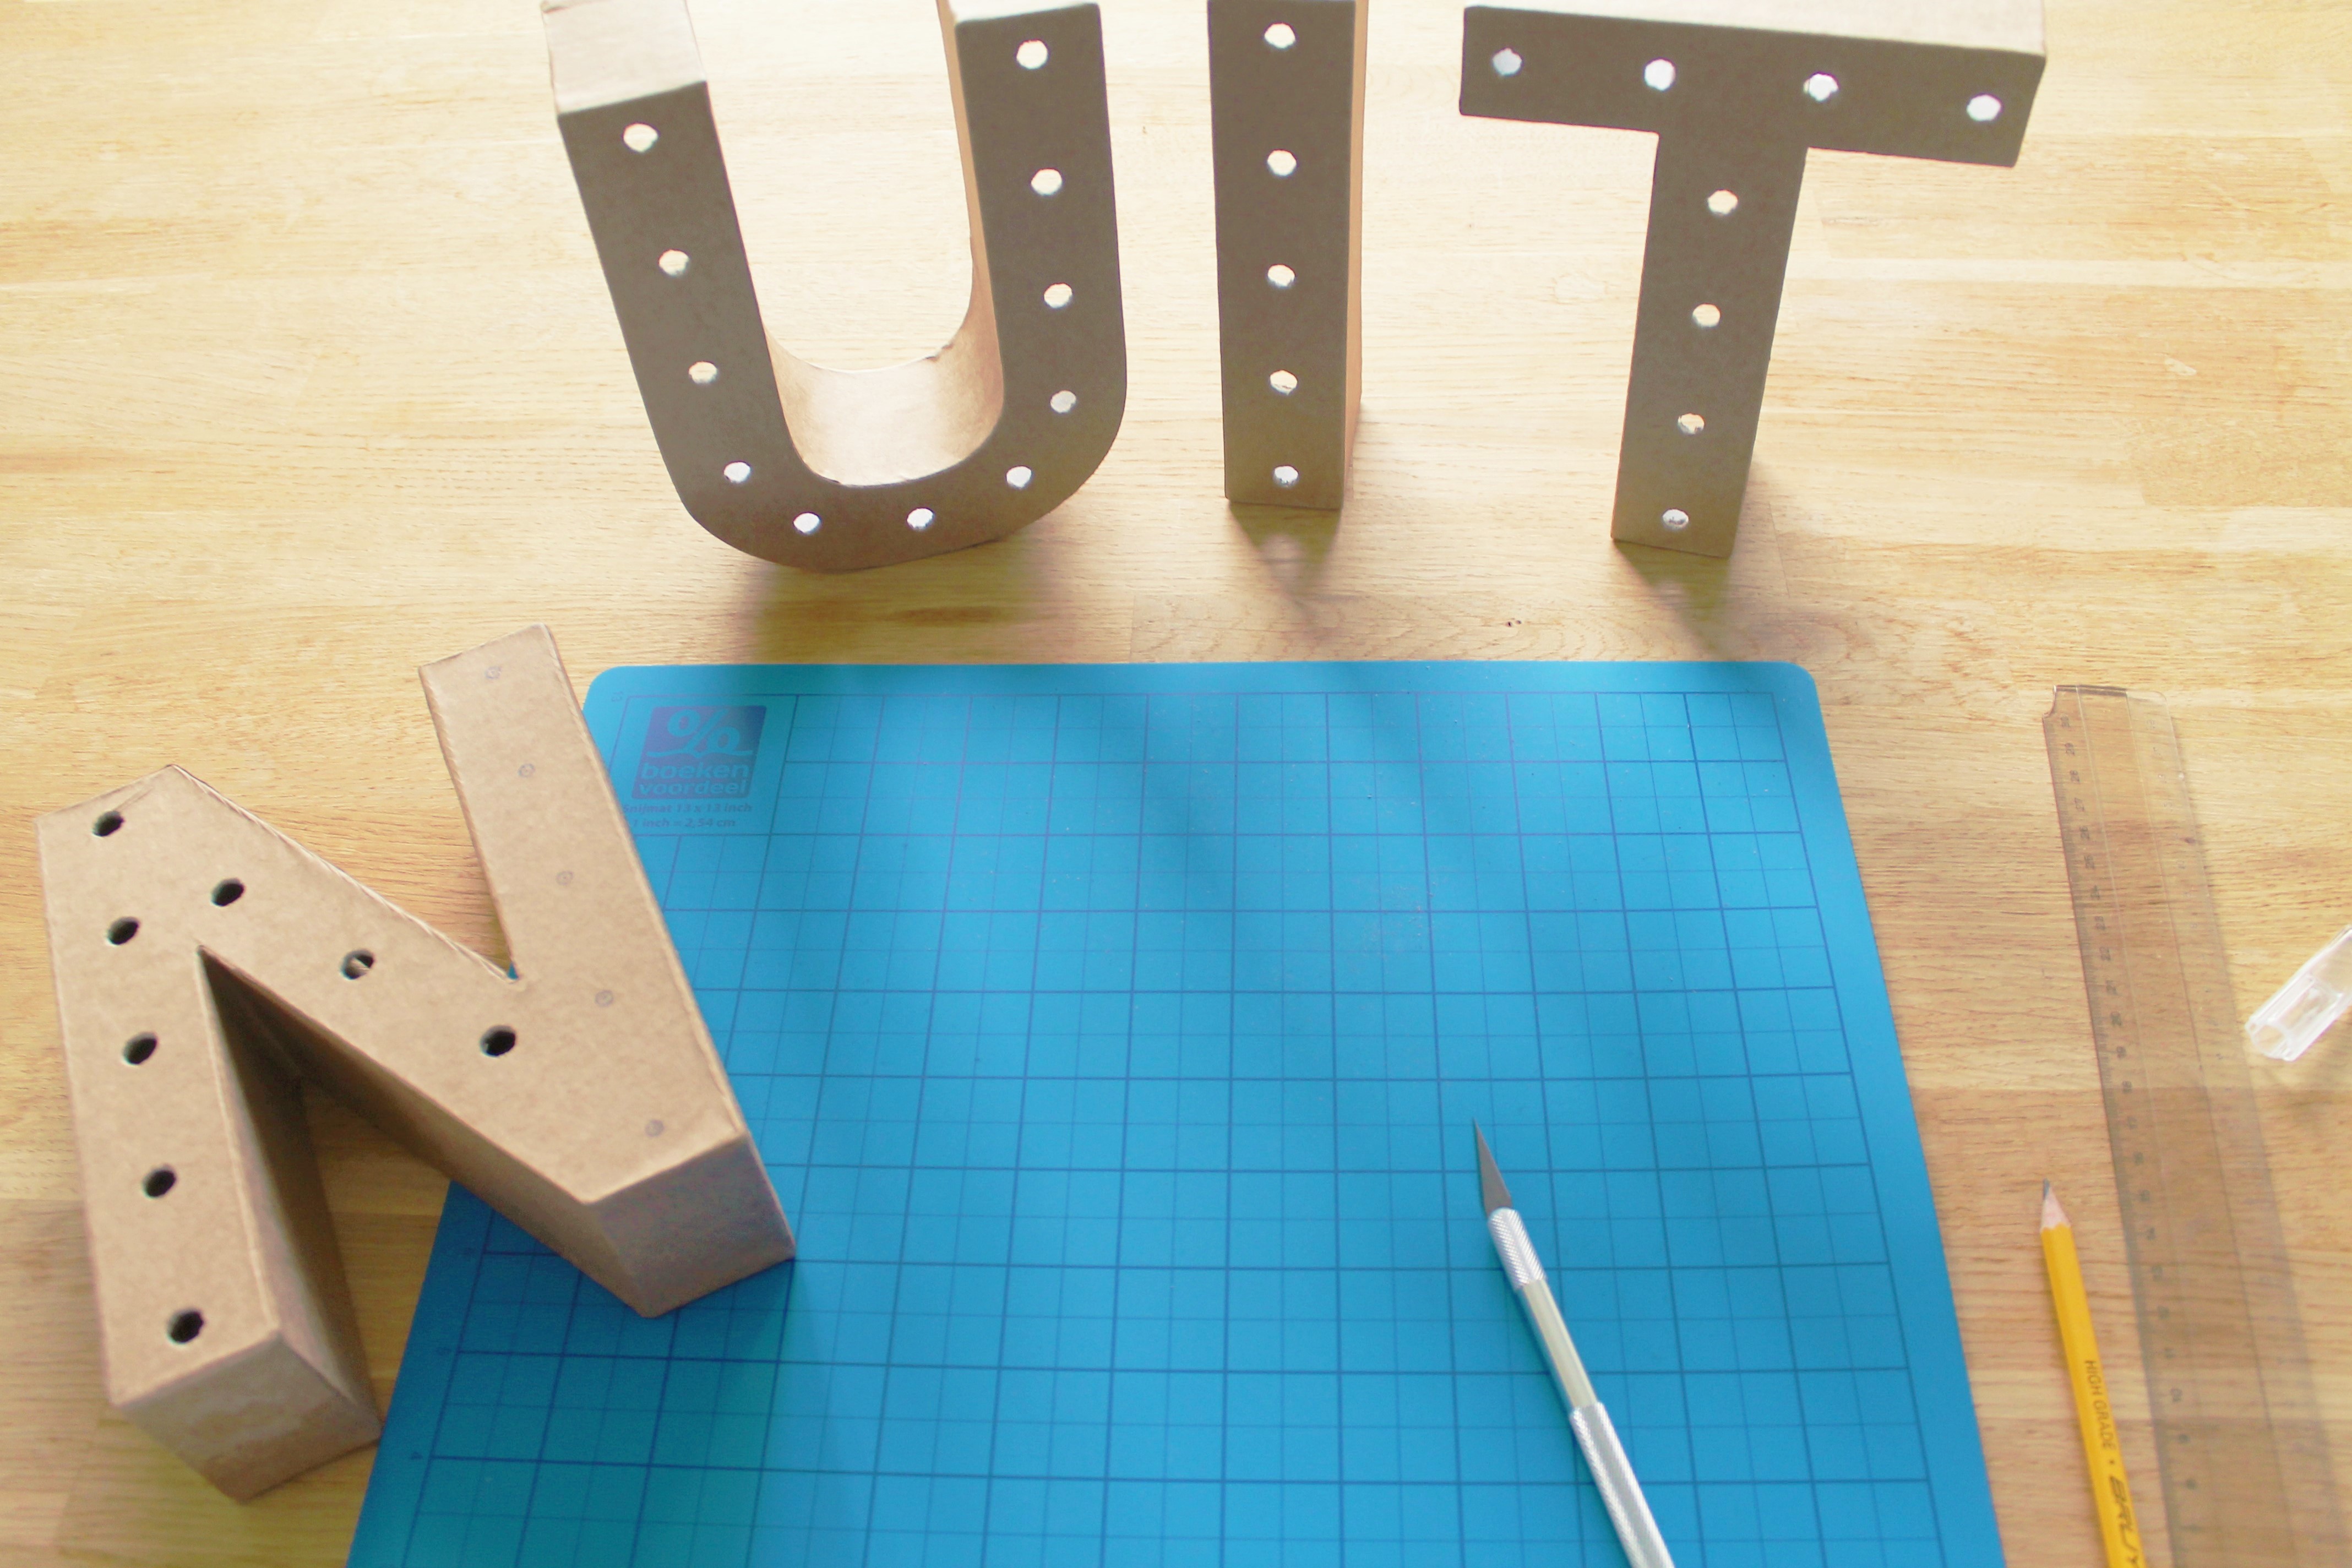 DIY: Marquee letters inspired lamp | Marquee letters are a big trend right now, but they can be quite costly. Here we'll show you how to make this lamp for just a few bucks - woohoo! Click through for the full description.